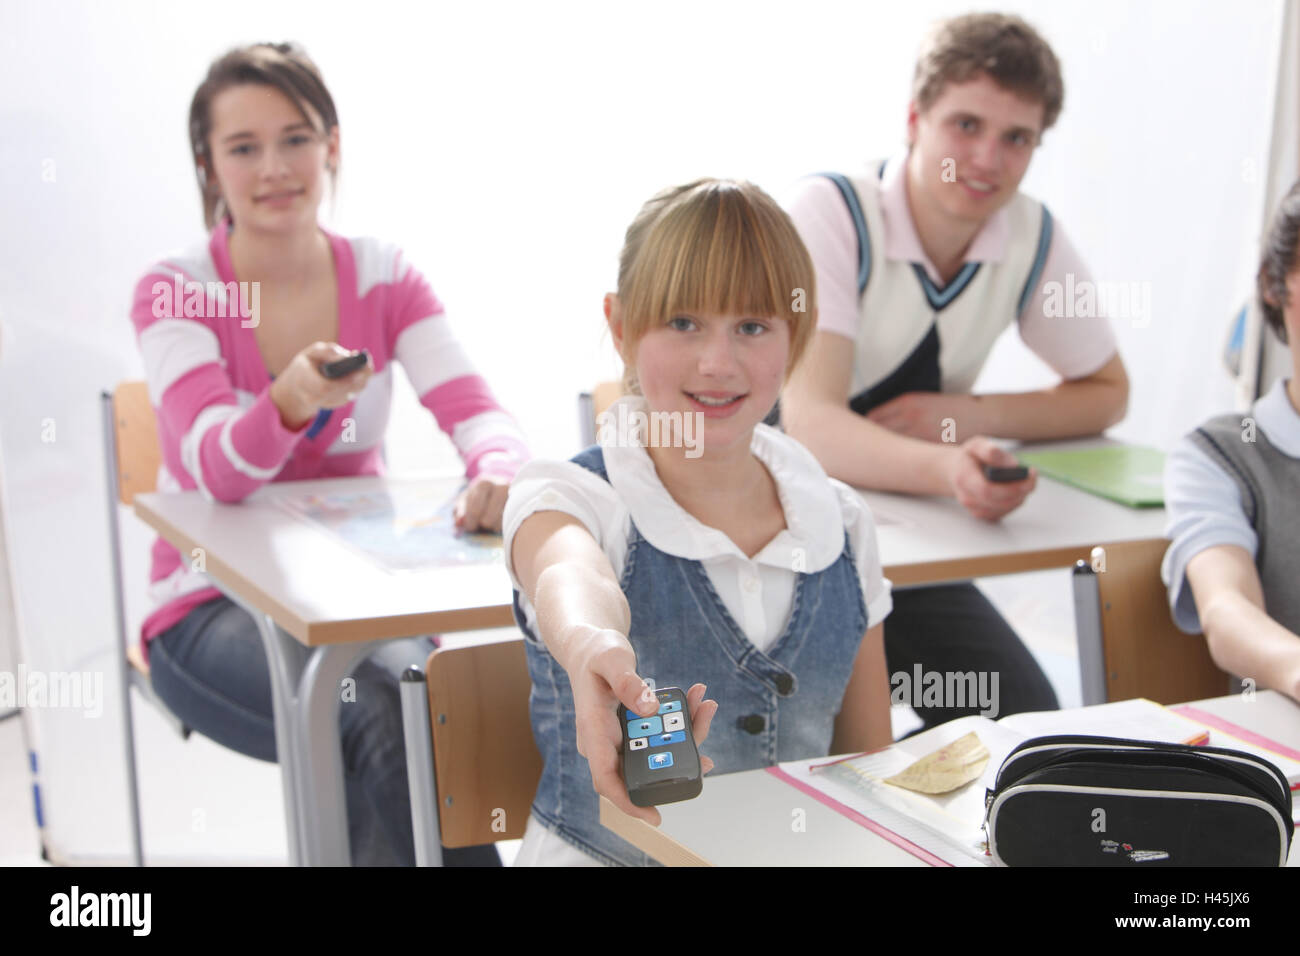 Schoolboy, classroom, lessons, Voting system, Stock Photo